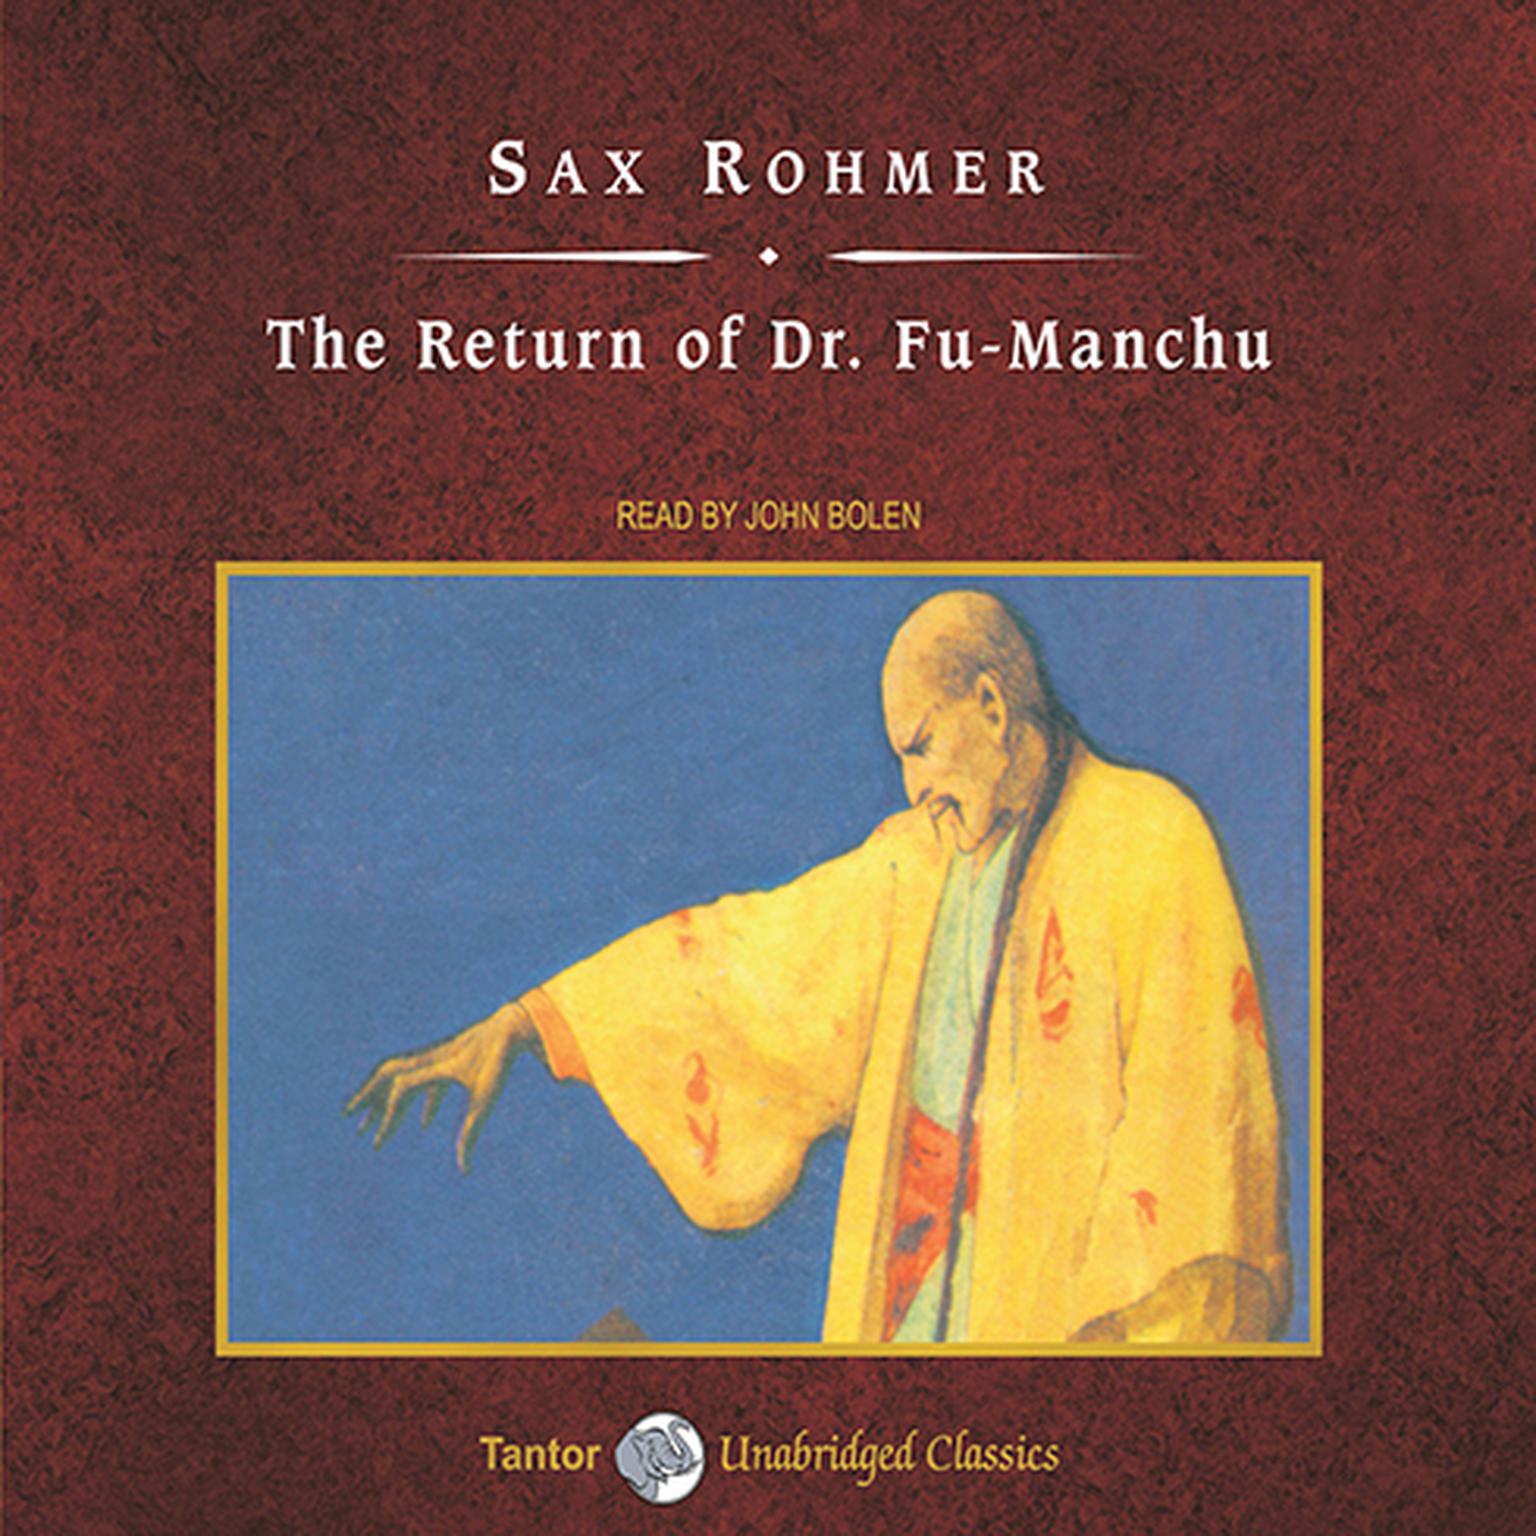 The Return of Dr. Fu-Manchu, with eBook Audiobook, by Sax Rohmer